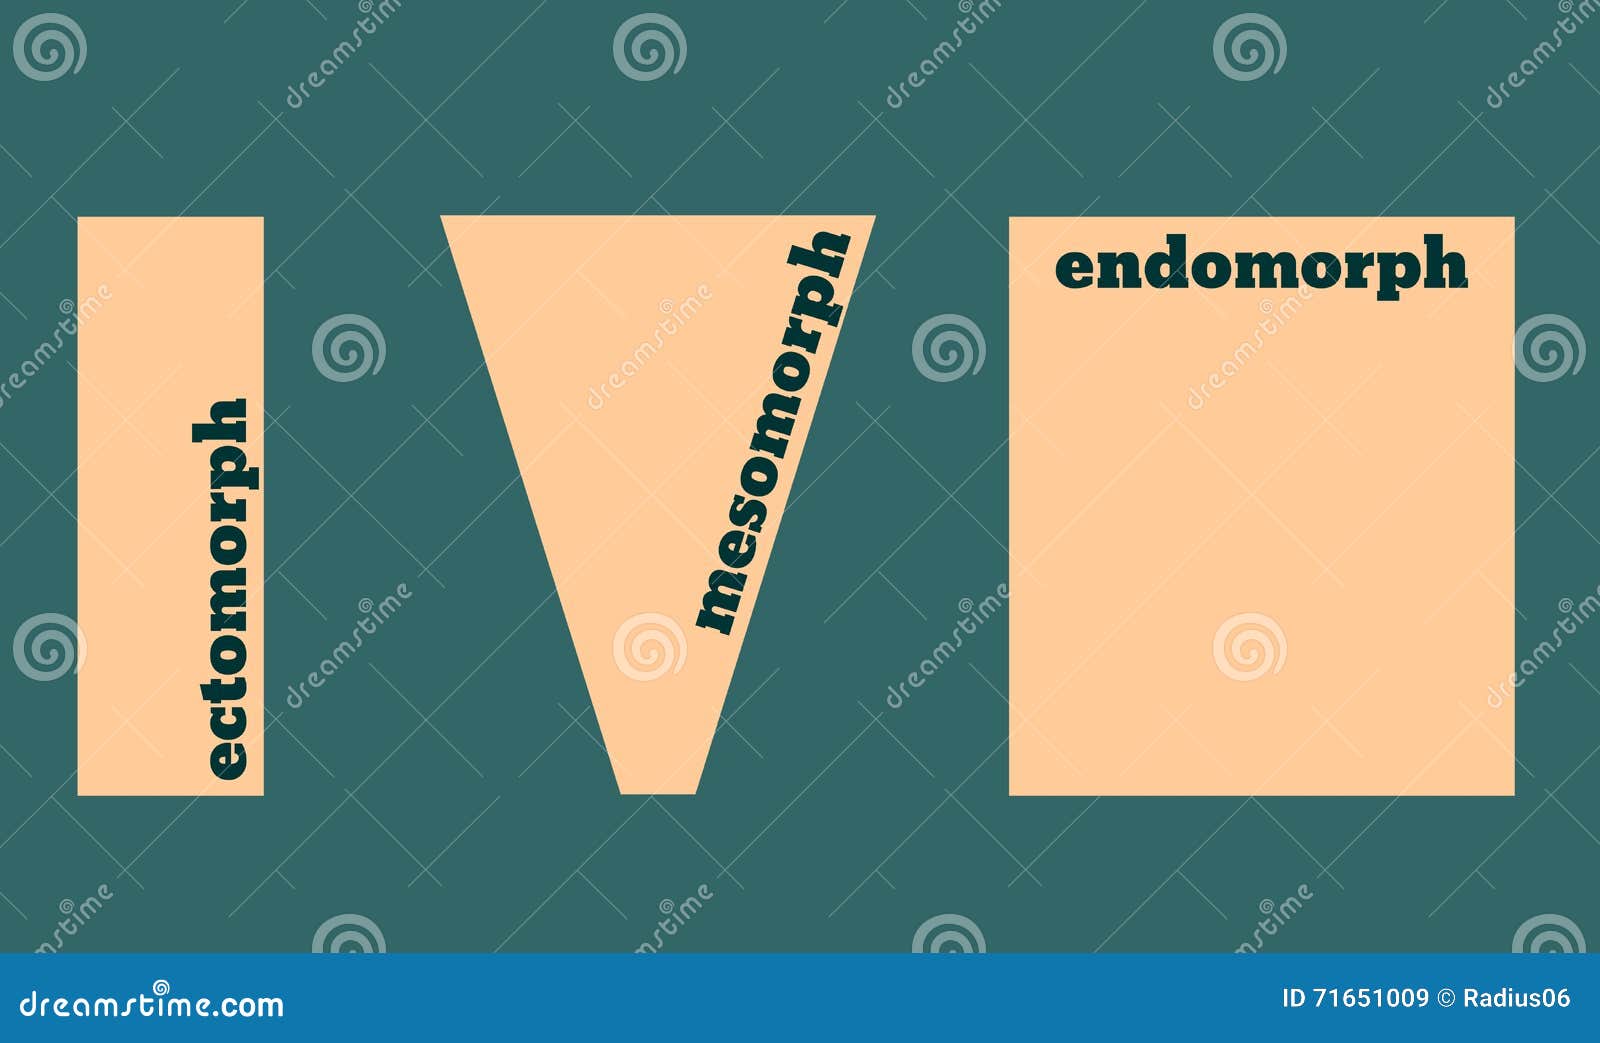 A 3D Illustration Of A Male Body Showcasing Three Different Body Types -  Ectomorph, Mesomorph, And Endomorph, Highlighting The Unique  Characteristics Of Each Body Type. Stock Photo, Picture and Royalty Free  Image.